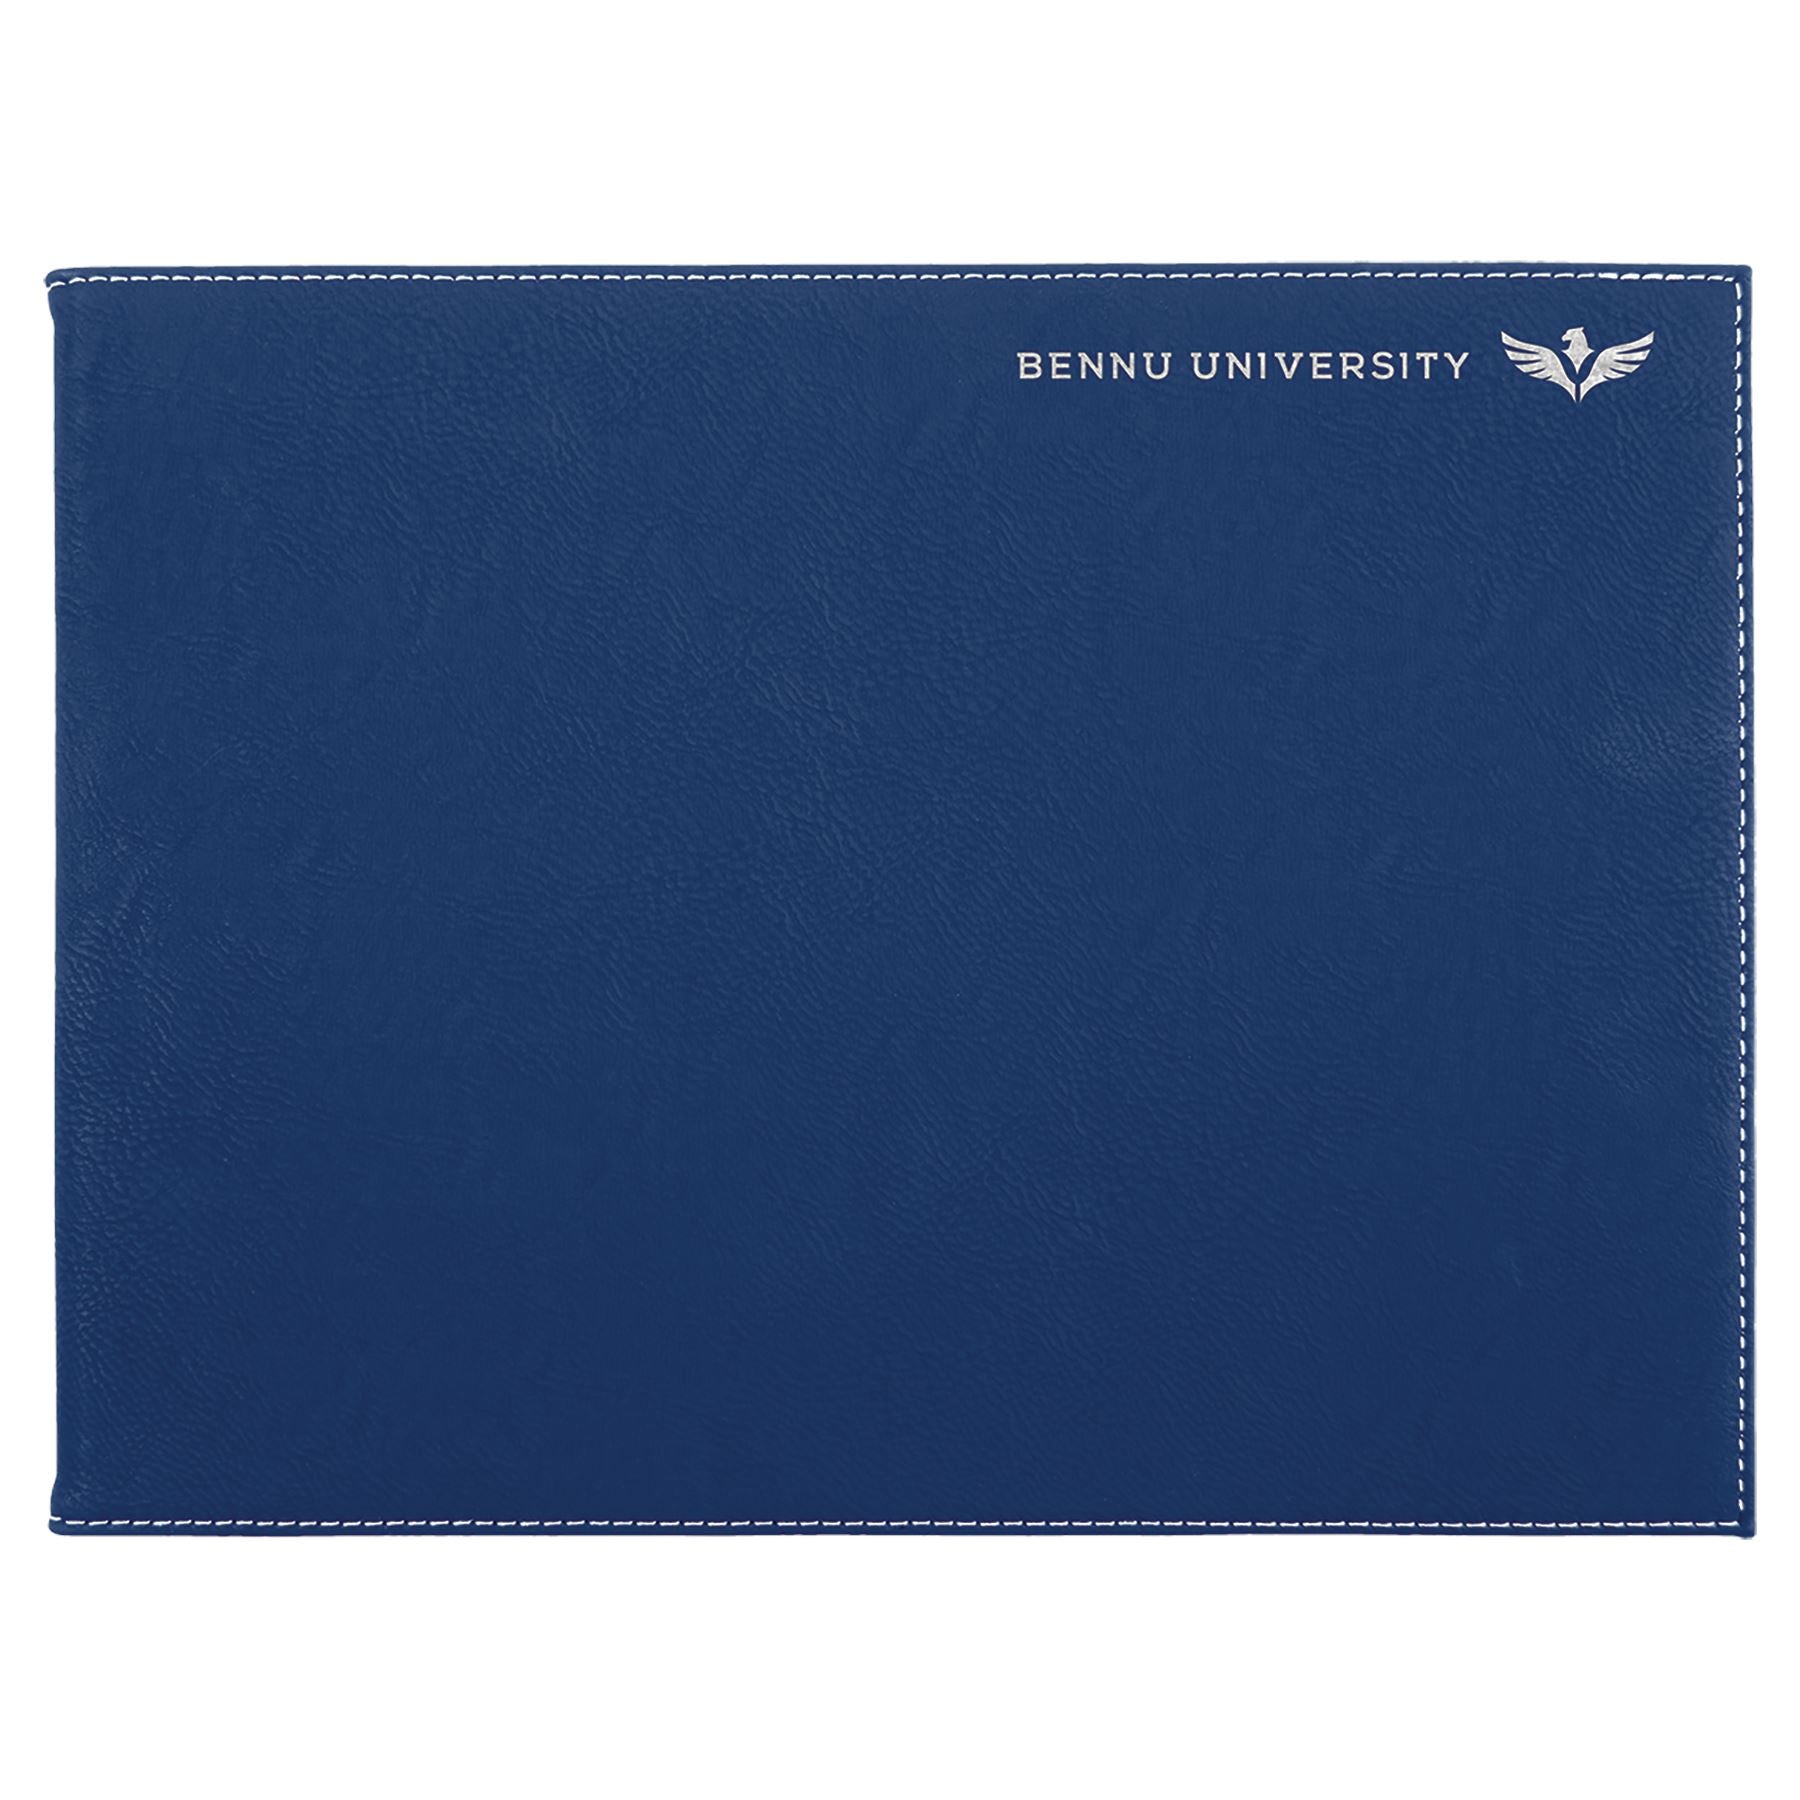 Certificate/Diploma Holder 9" x 12" (Holds 8 1/2" x 11" Document), Laserable Leatherette Certificate Holder Craftworks NW Blue/Silver 